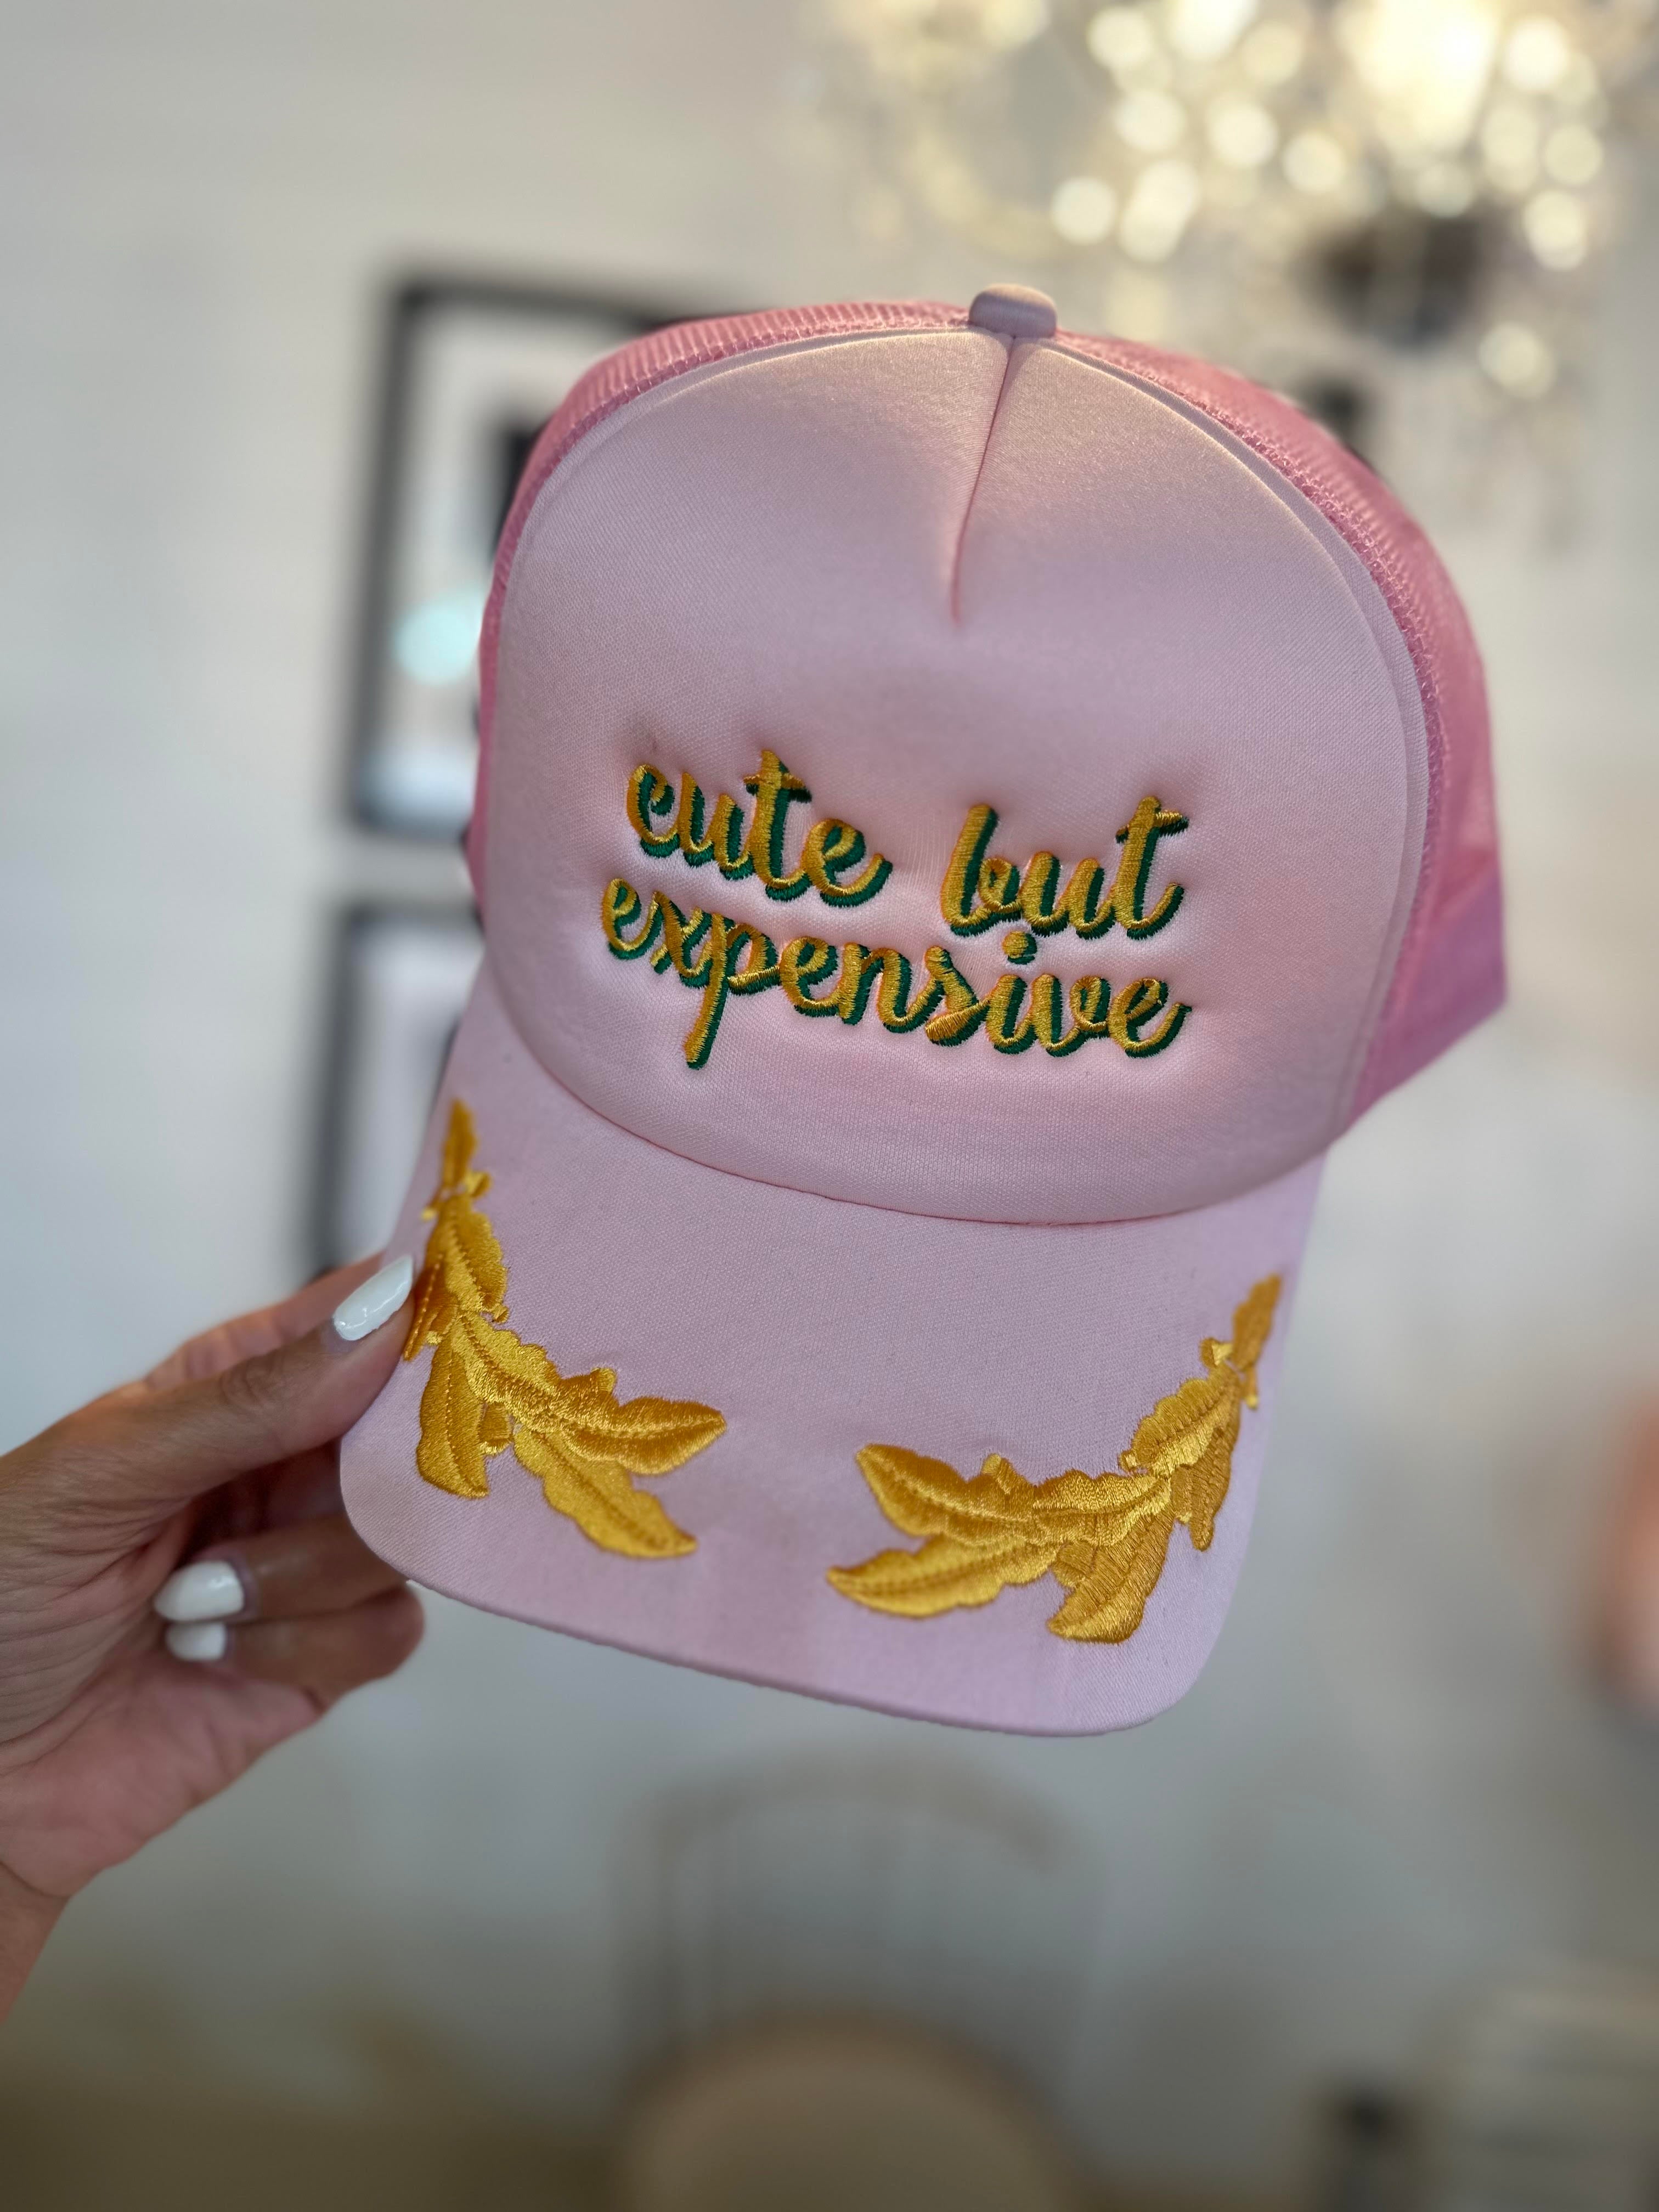 “Cute but expensive” Trucker Hat